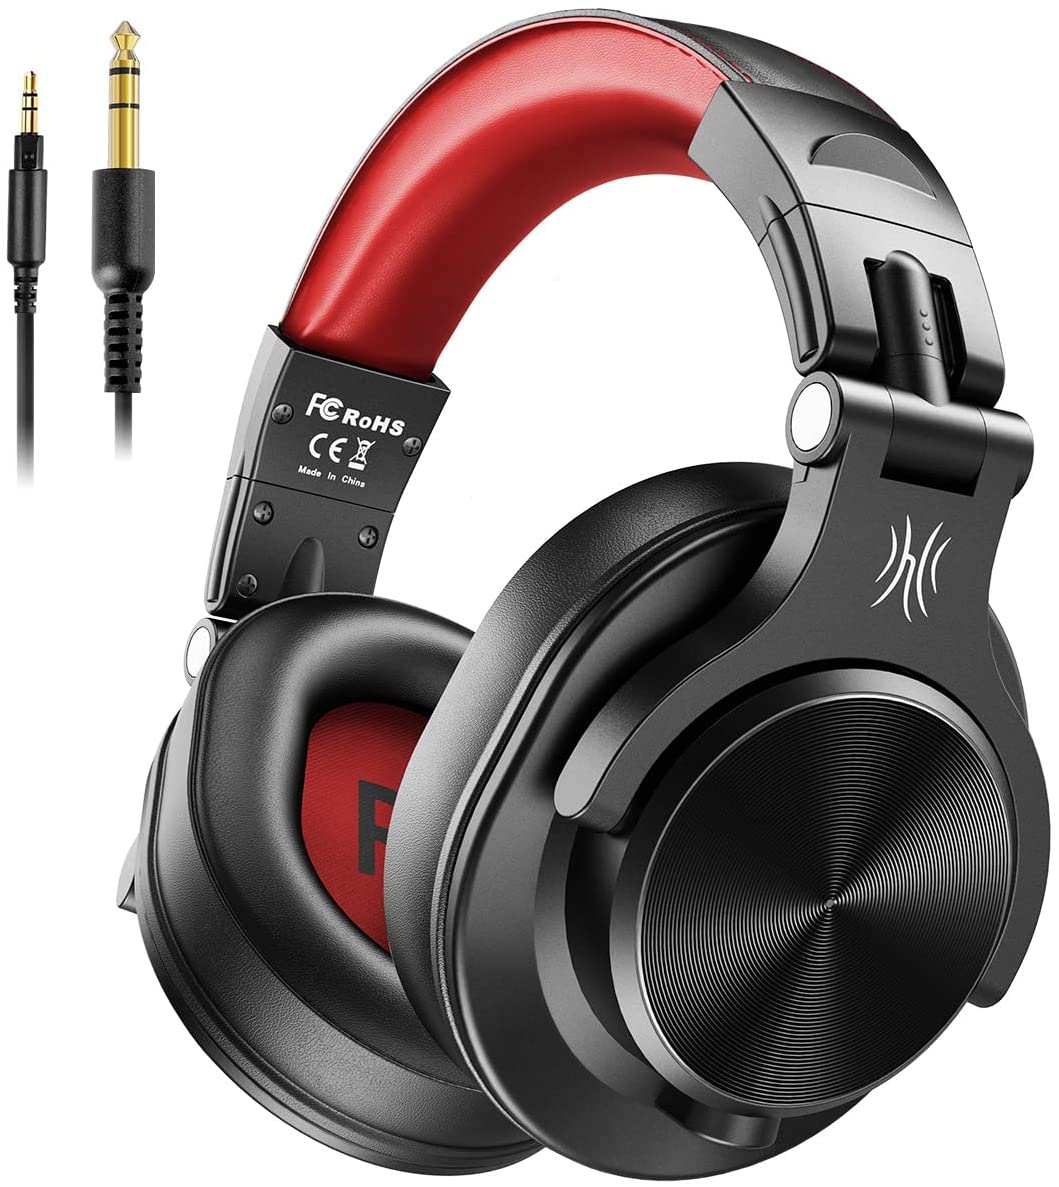 OneOdio A71 Cuffie con Cavo Over Ear Stereo